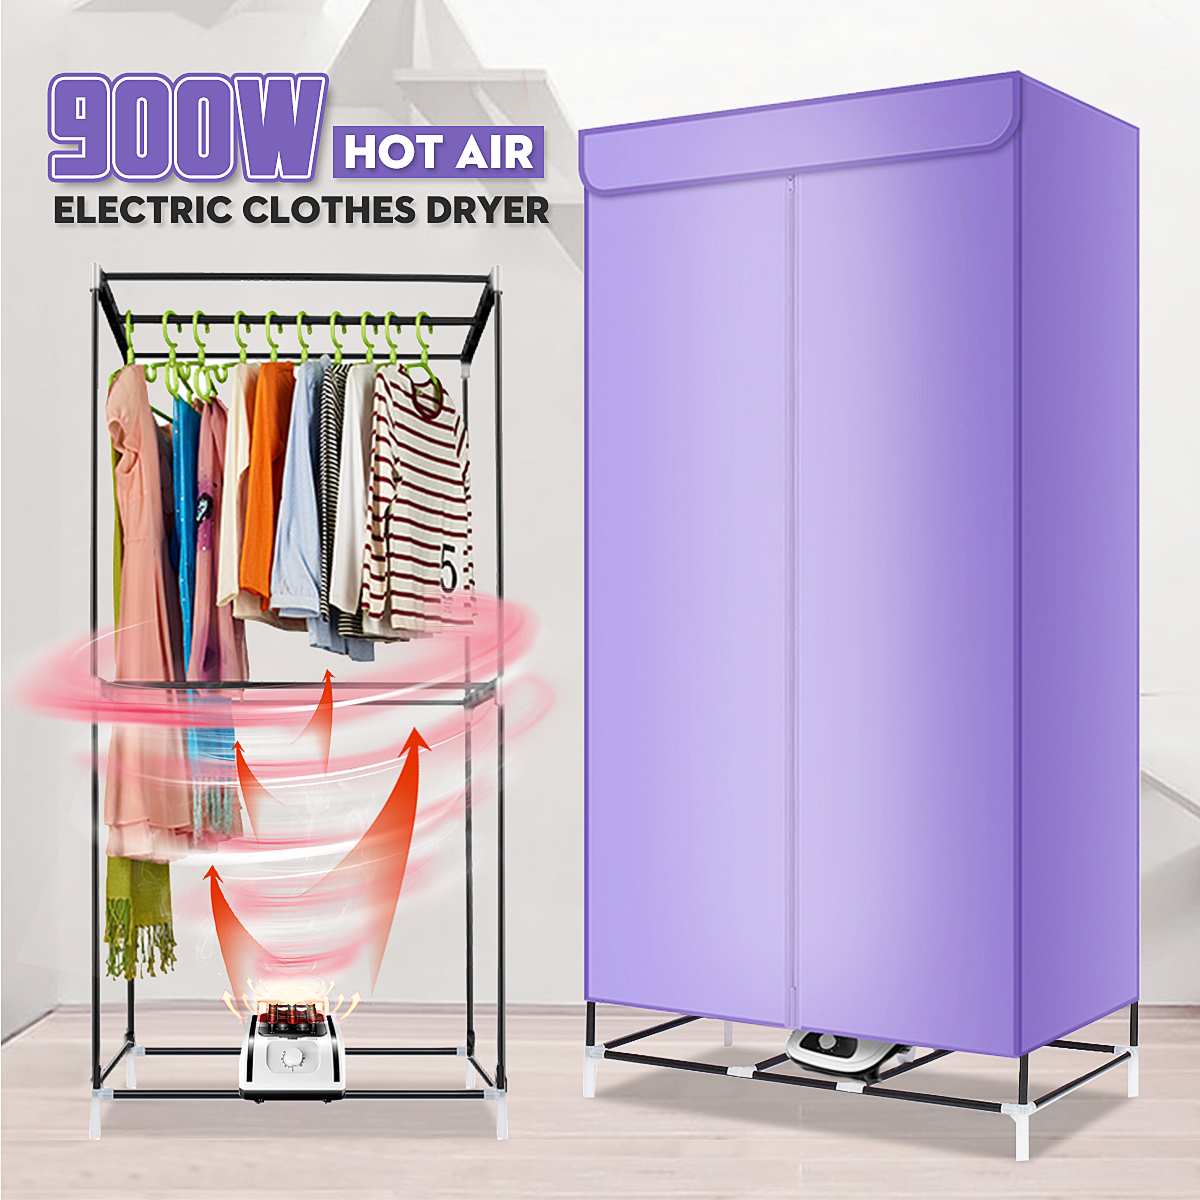 900/1000W 220V Electric Cloth Dryer Household Portable Baby Cloth Shoes Boots Dryer Power Motor Drying Warm wWnd Laundry Garment